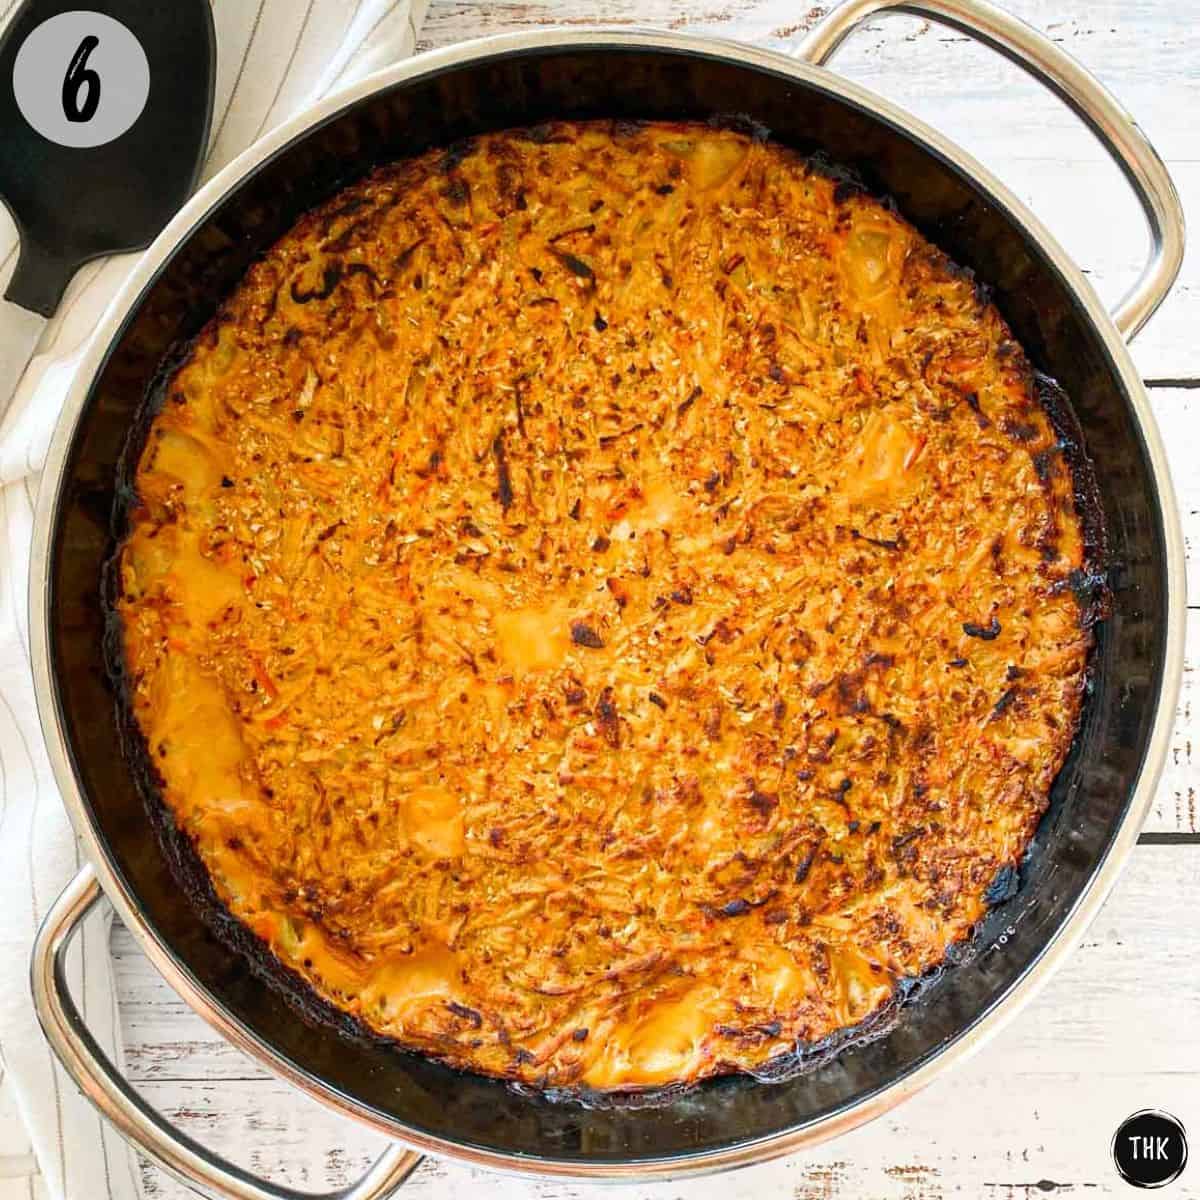 Baked hash brown casserole inside large pan.